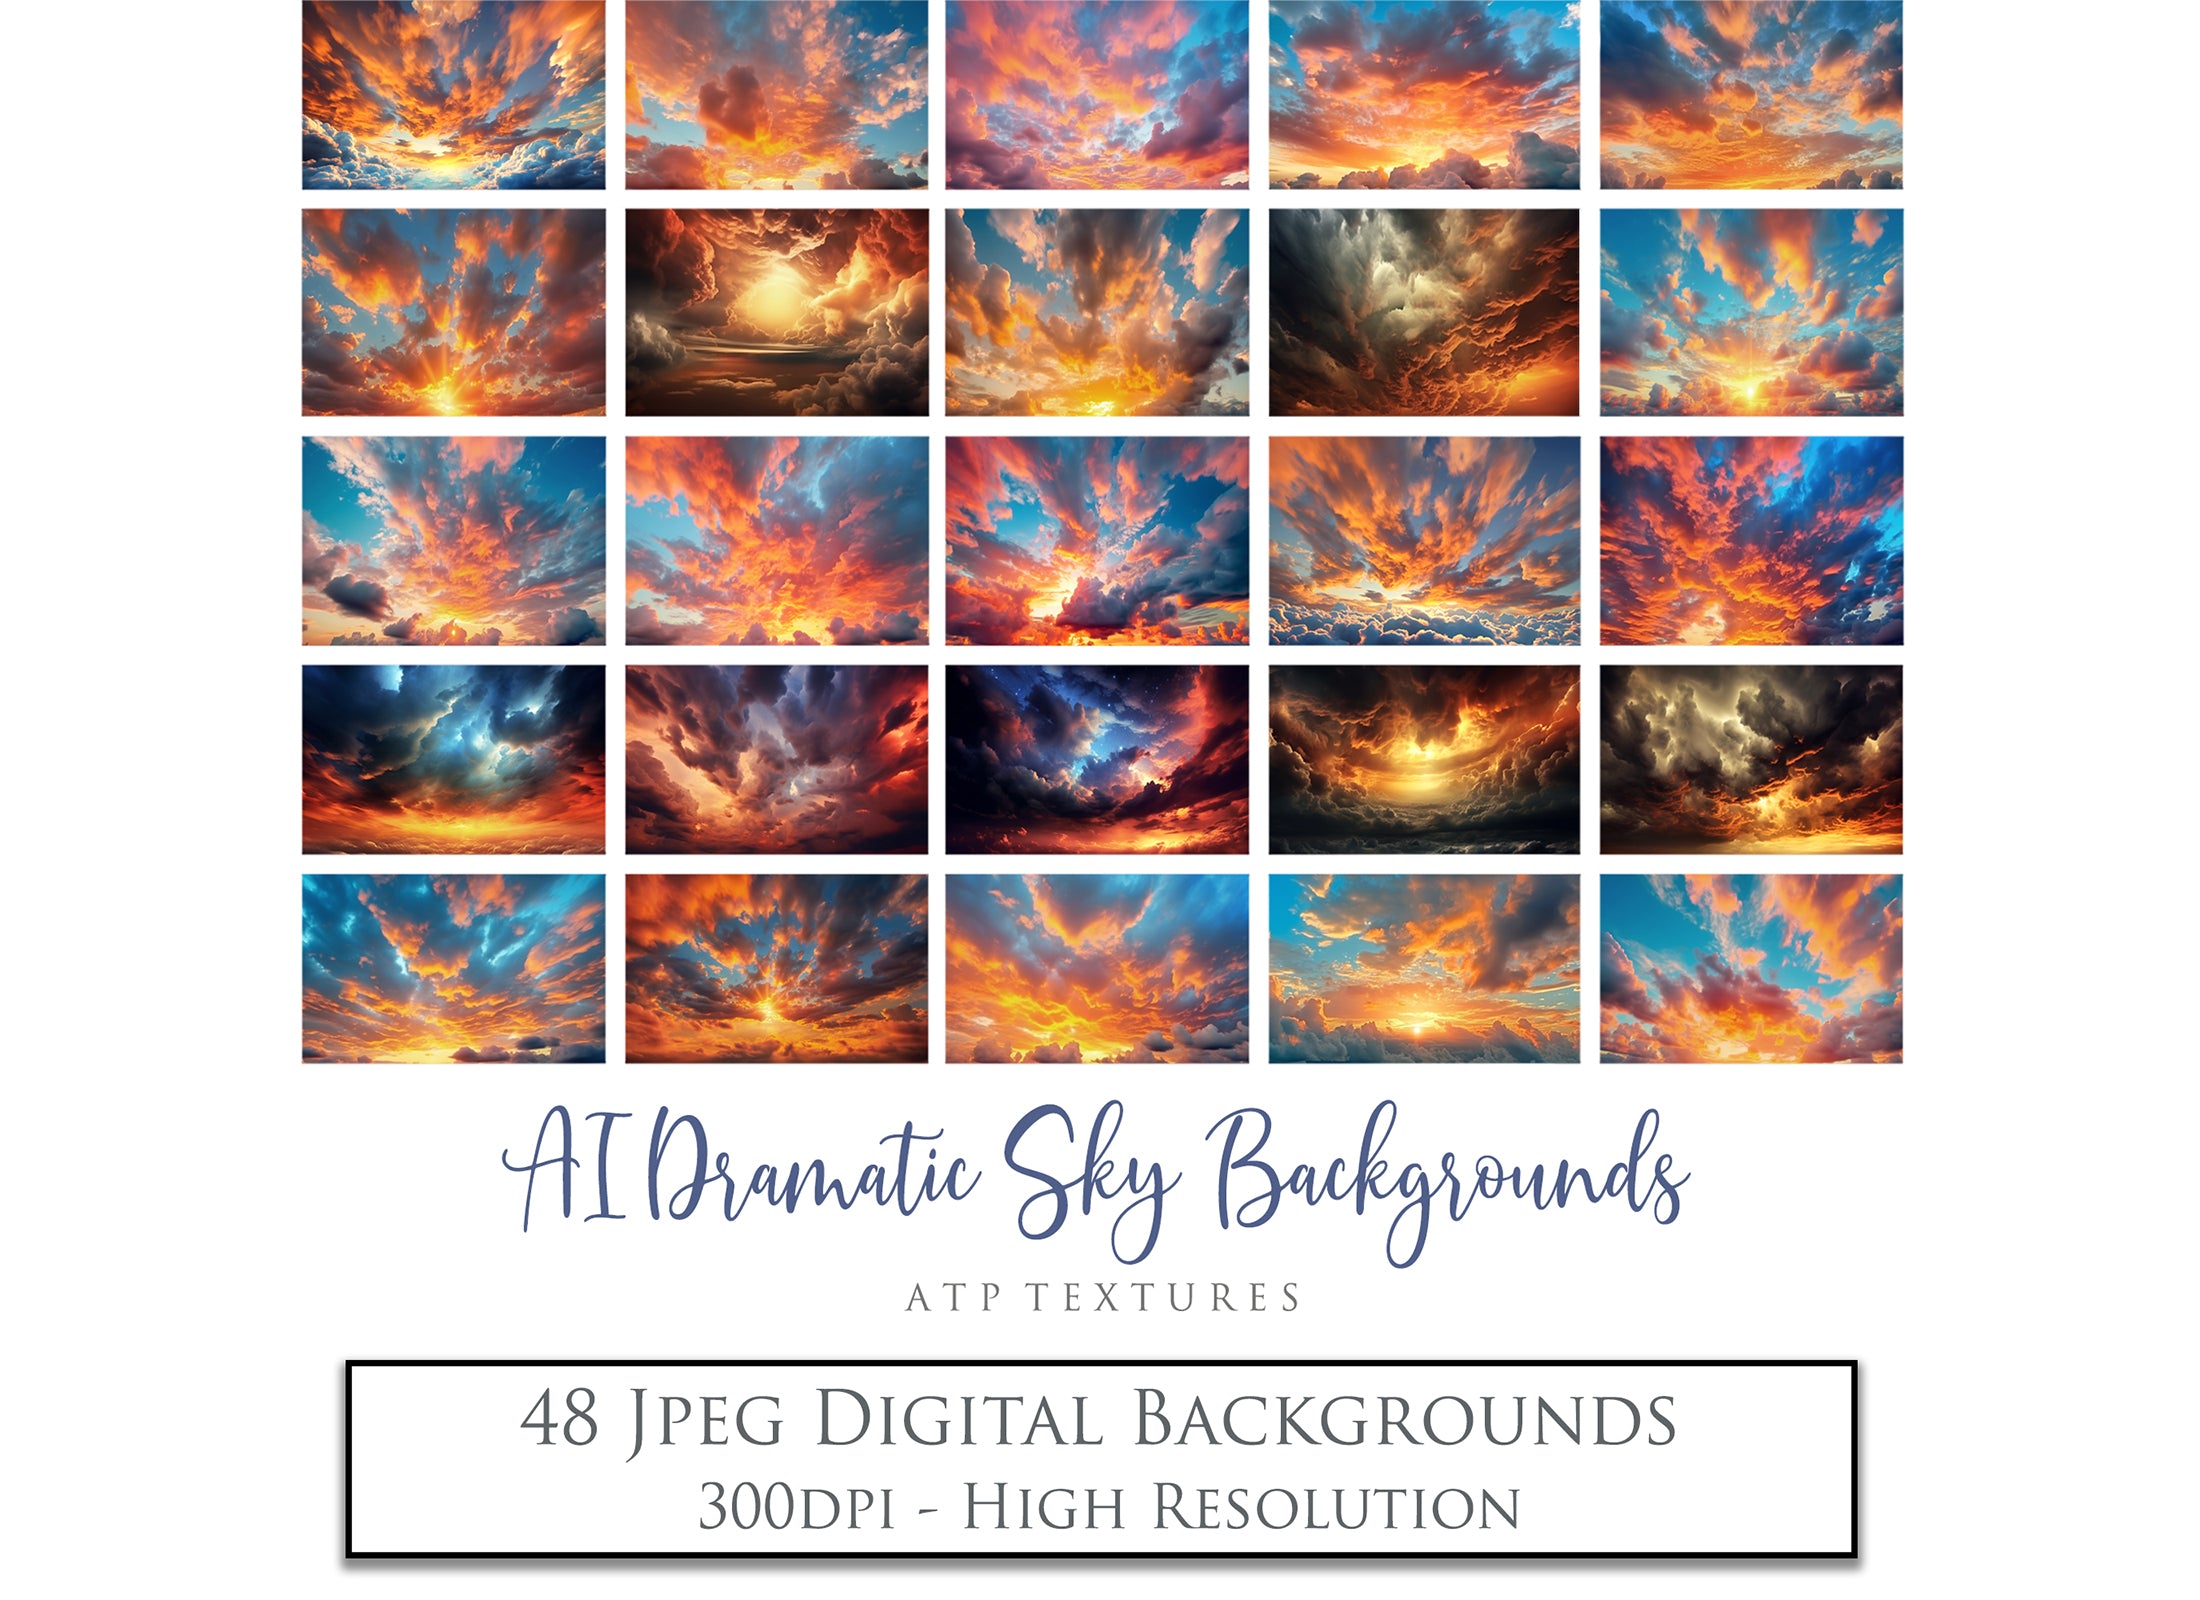 Dramatic Sky Overlays. Digital Backgrounds for Photographers. Add to your images for a dramatic sky effect. Each Digital file is 300dpi. All are 3500x6000.  These are in Jpeg format and high resolution. Find more at ATP Textures store!